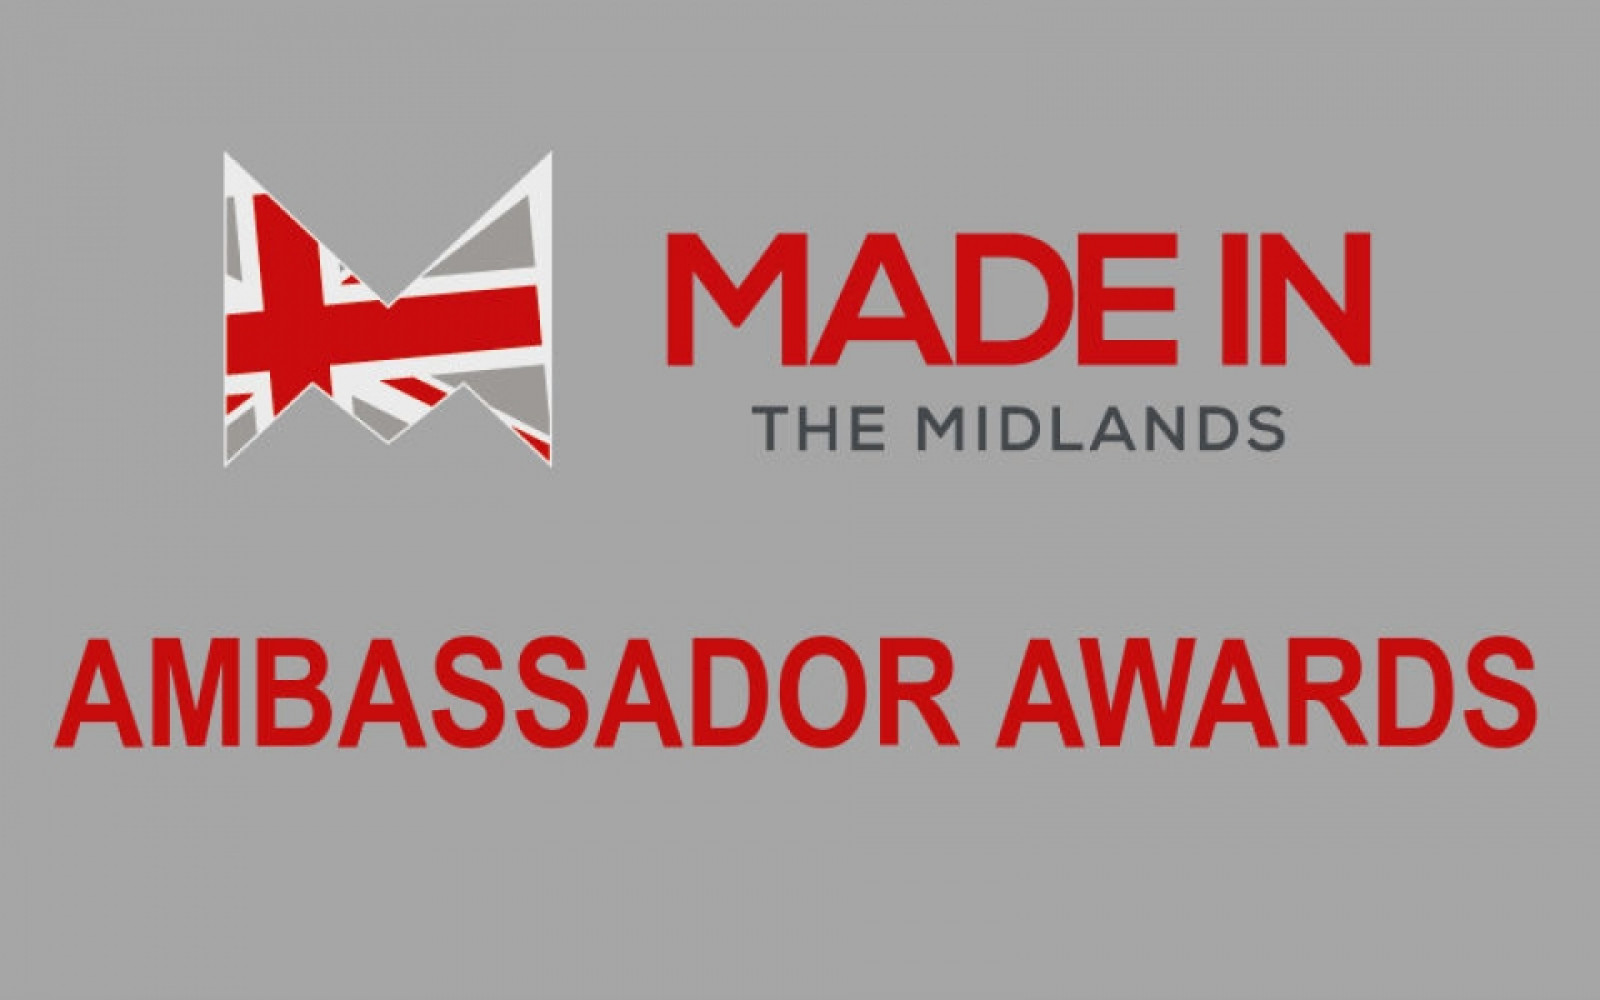 Nominations are now Open for the MIM Ambassador Awards